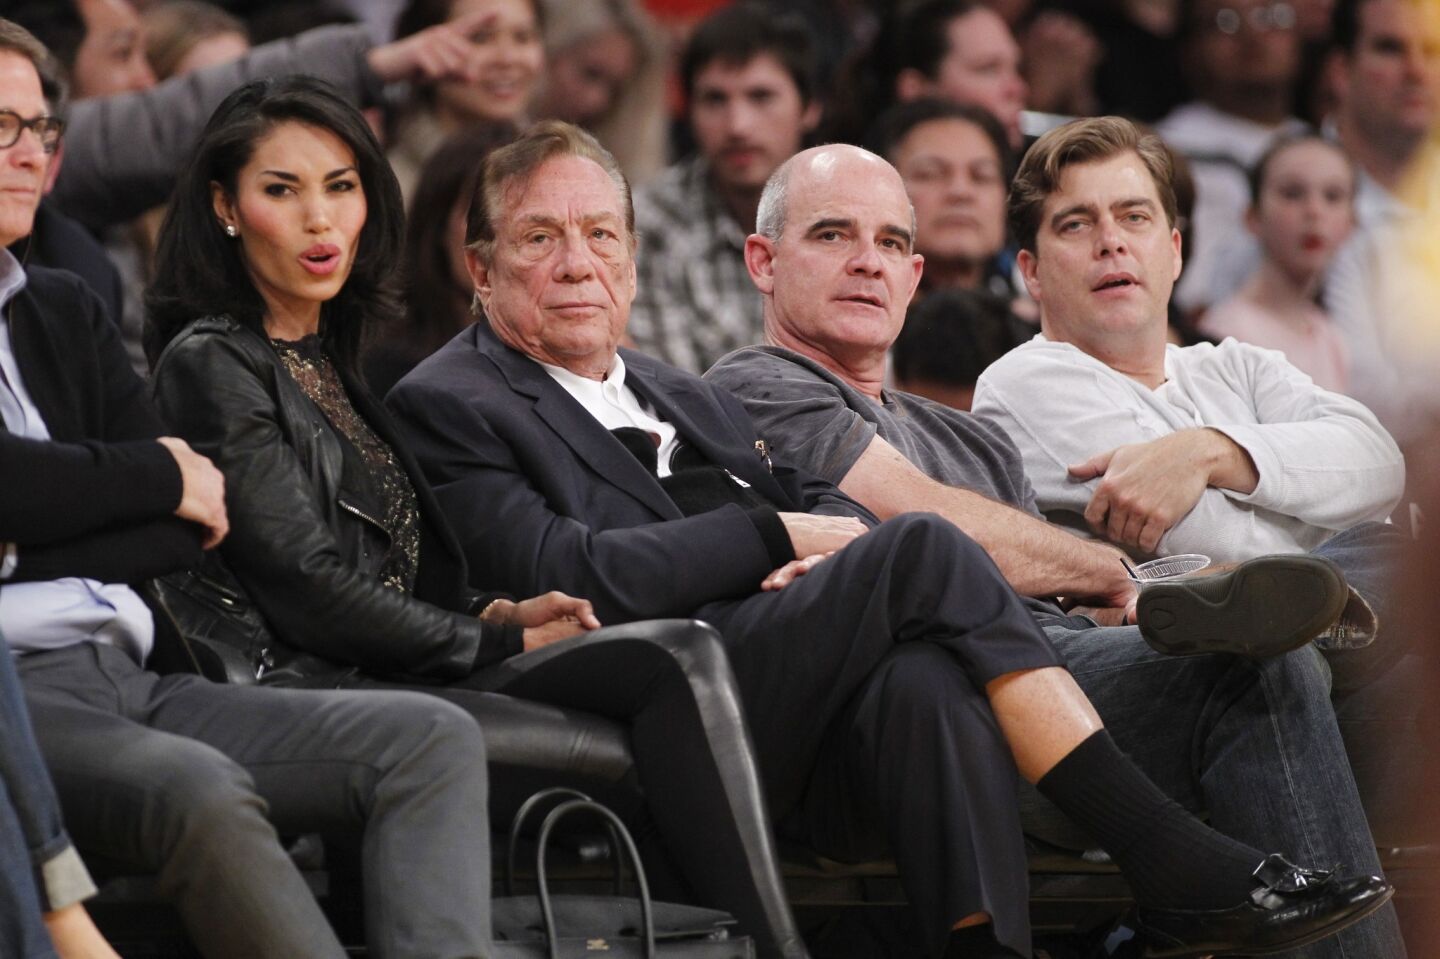 Los Angeles Clippers owner Donald Sterling, right, and V. Stiviano, left, watch the Clippers play the Los Angeles Lakers during an NBA preseason game in December 2010.